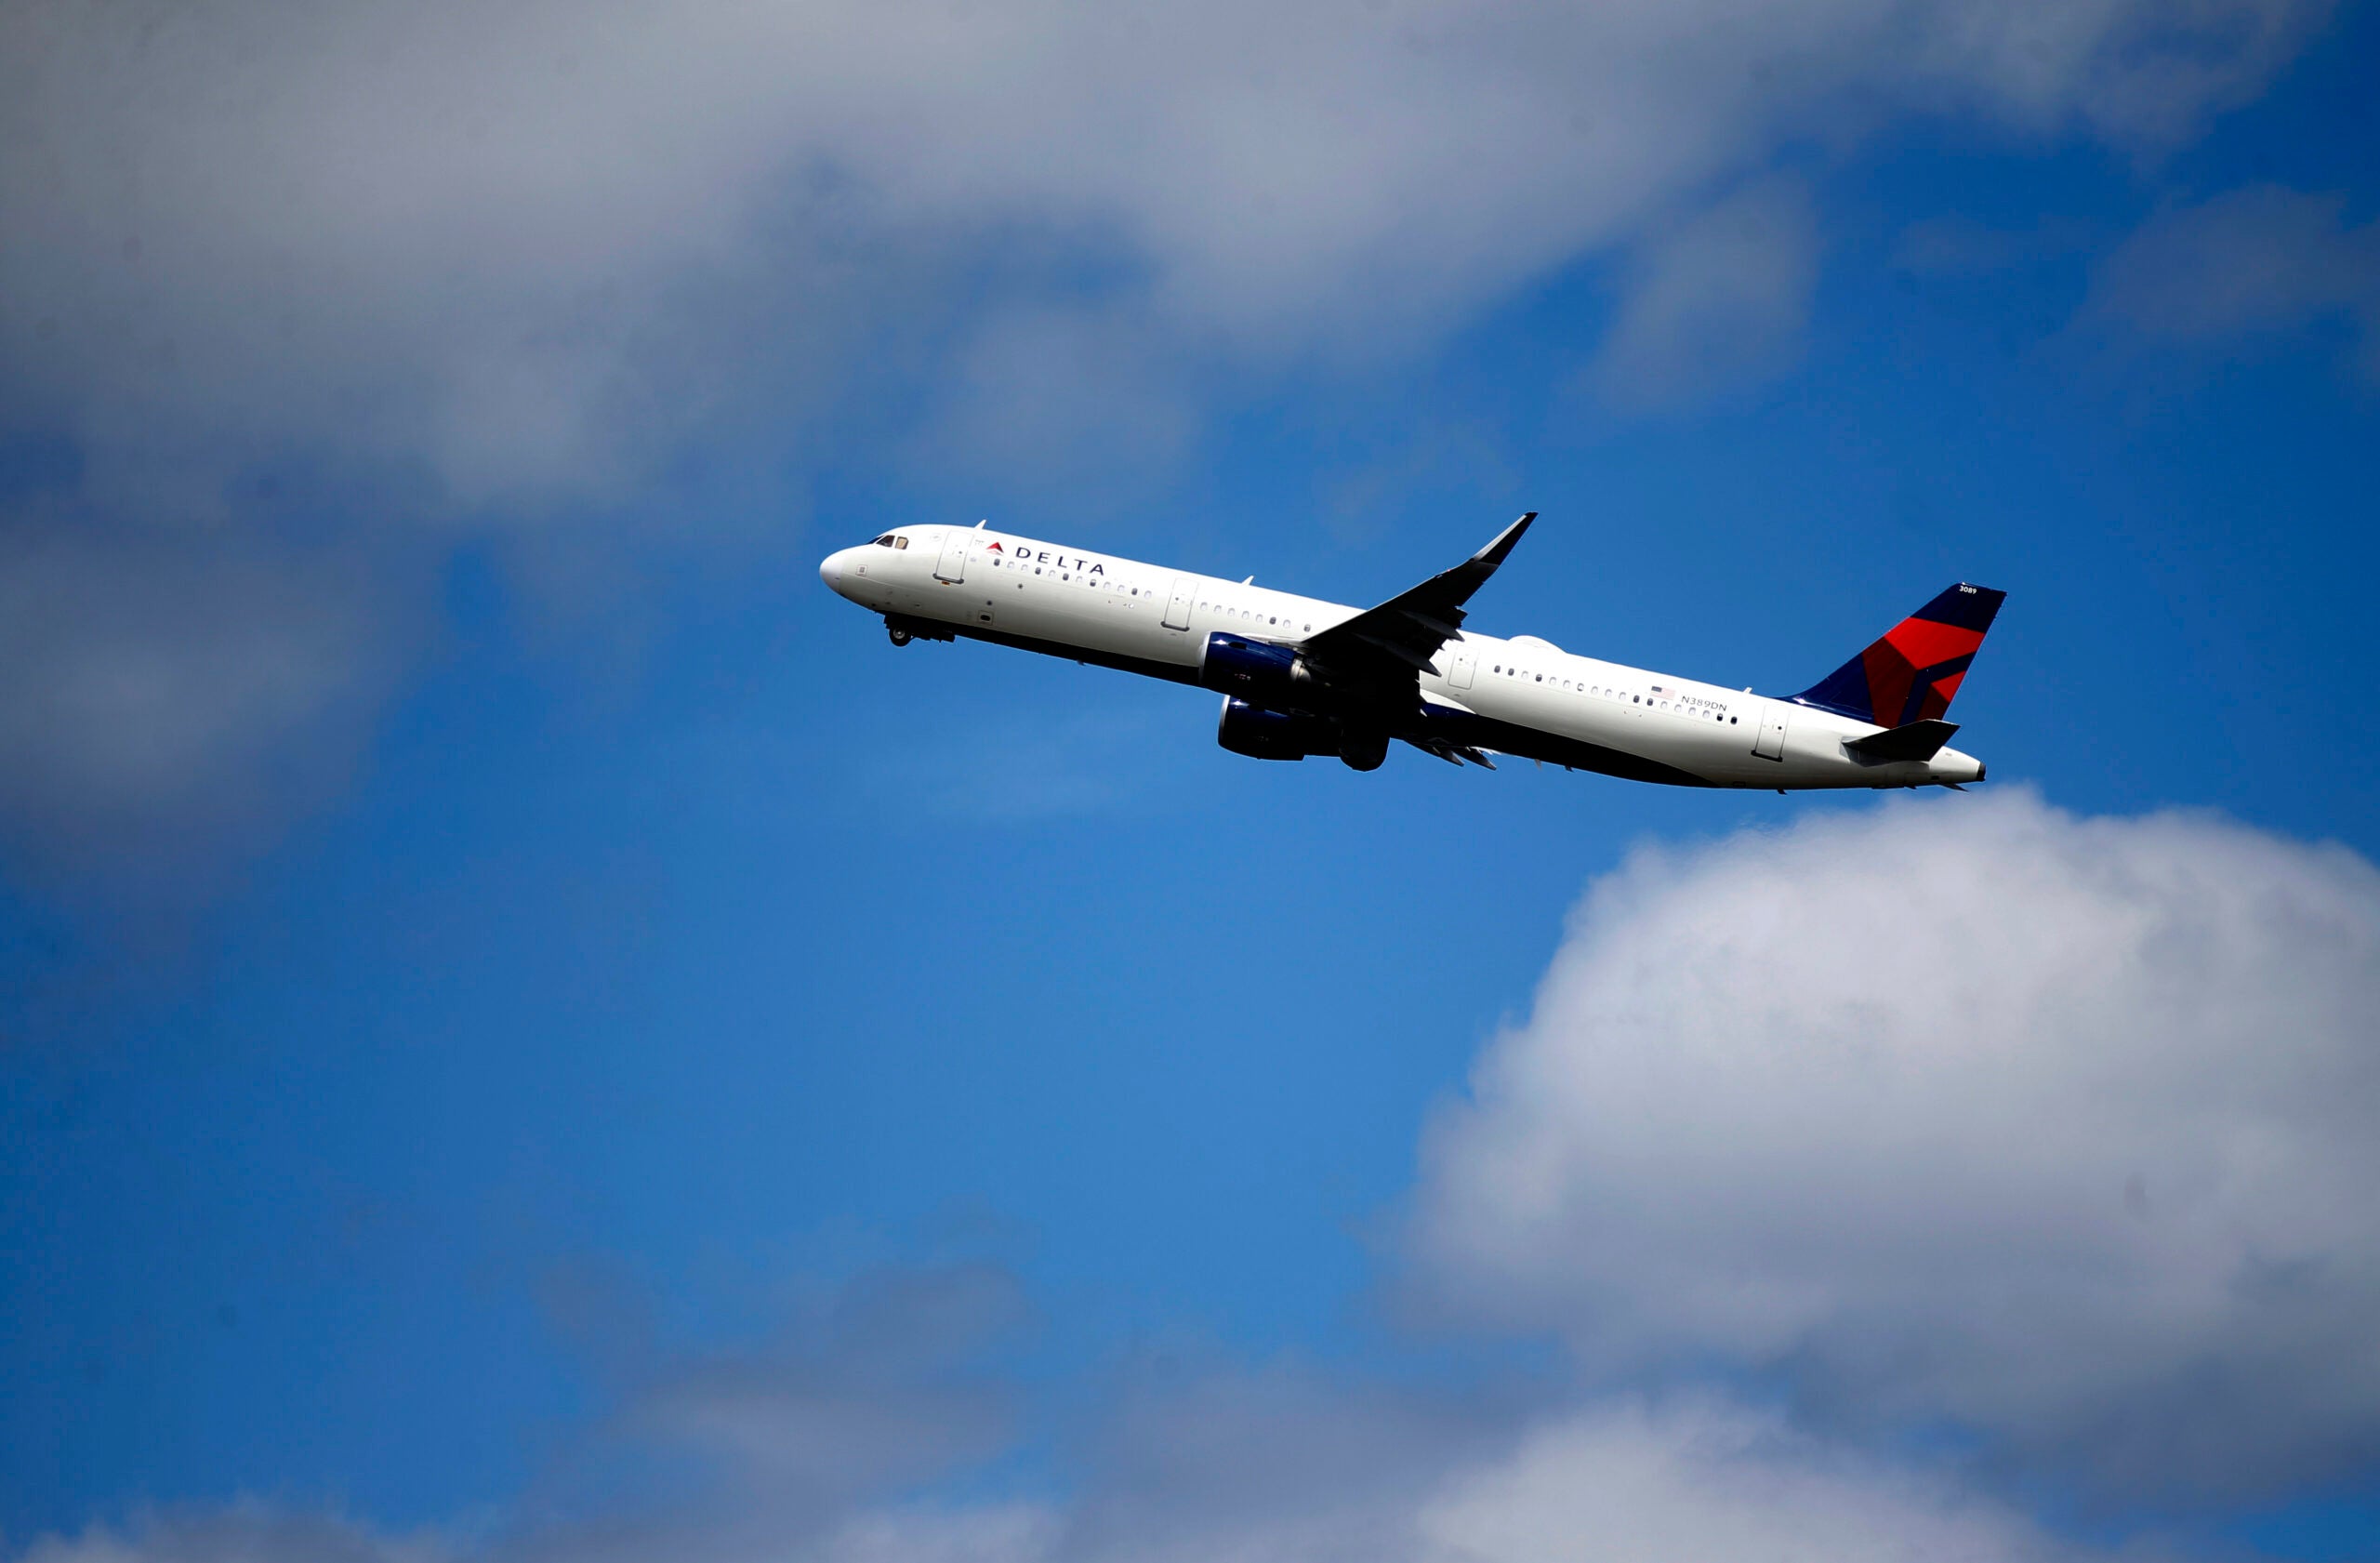 A Delta Air Lines jet takes off into the clouds.